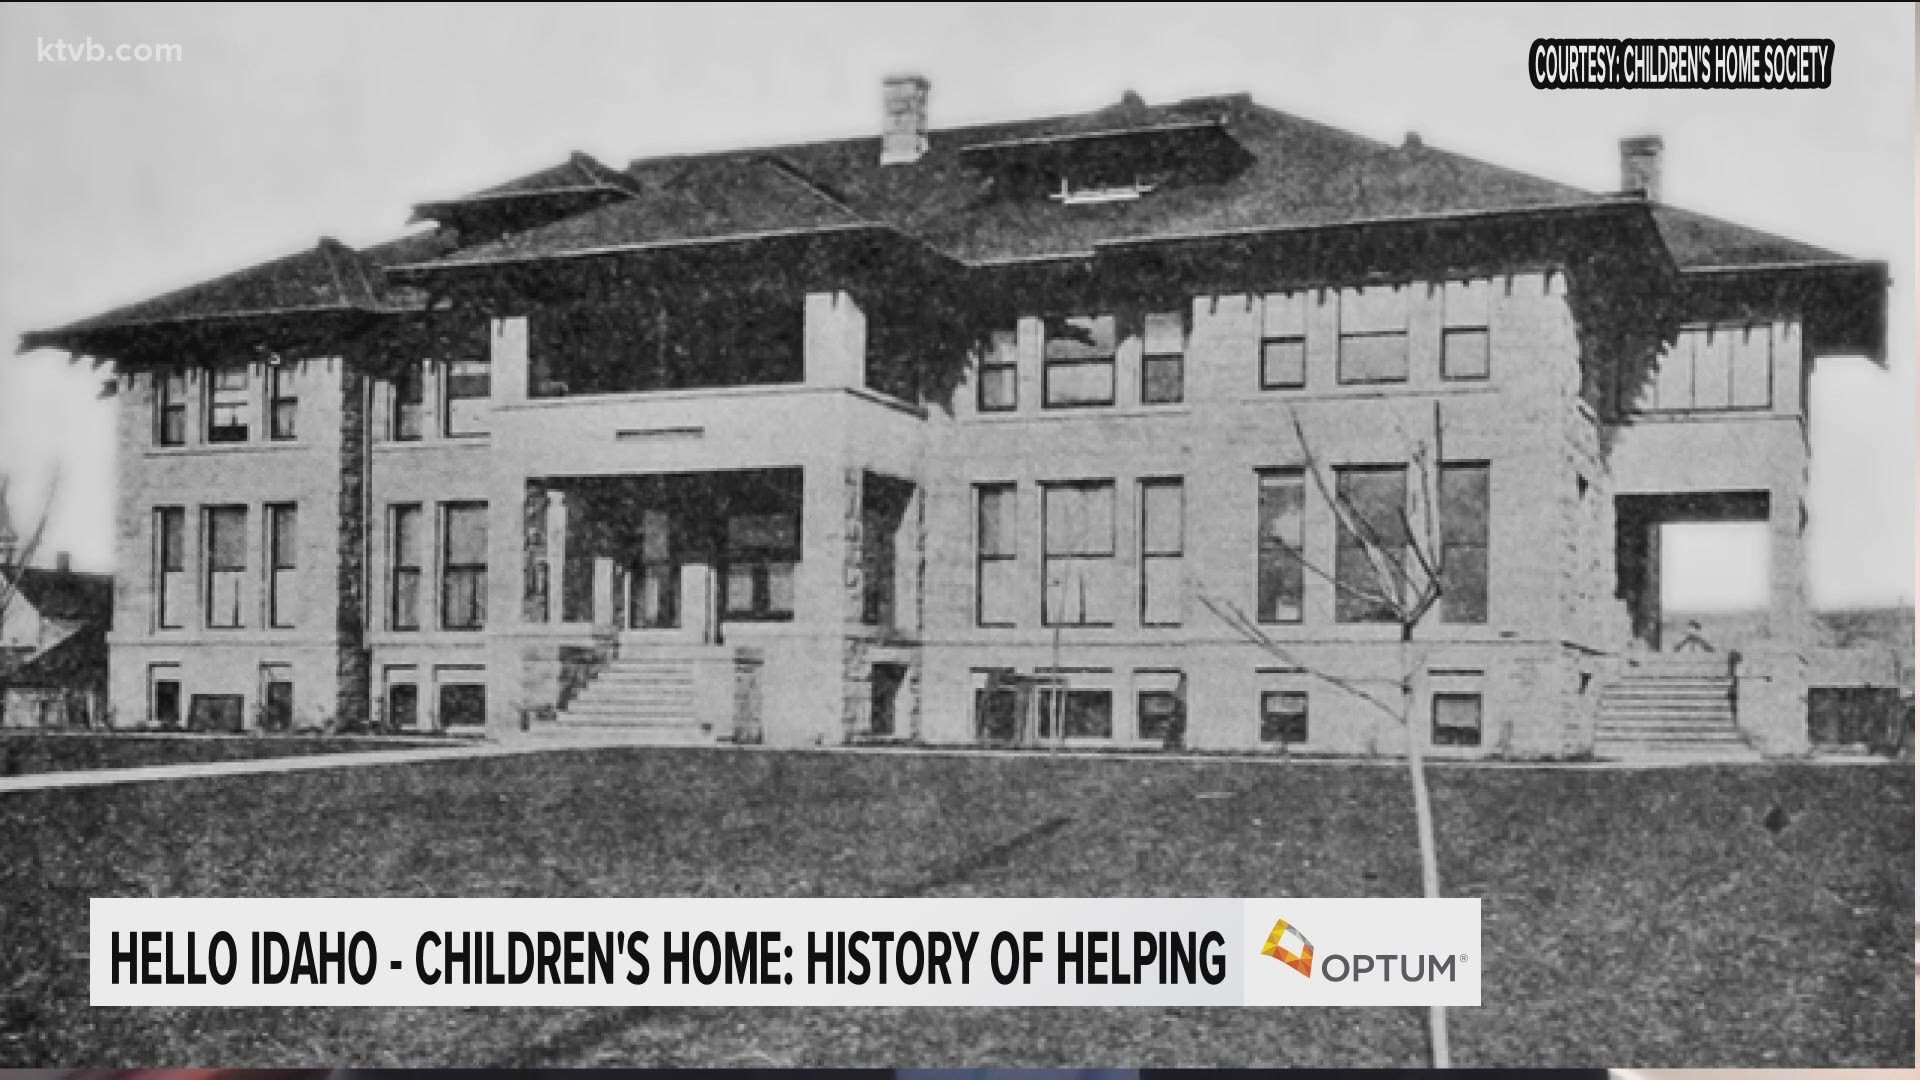 The Children's Home served as an orphanage until foster care came about in the late 1960s and early 70s. In 1975, it became an outpatient mental health clinic.